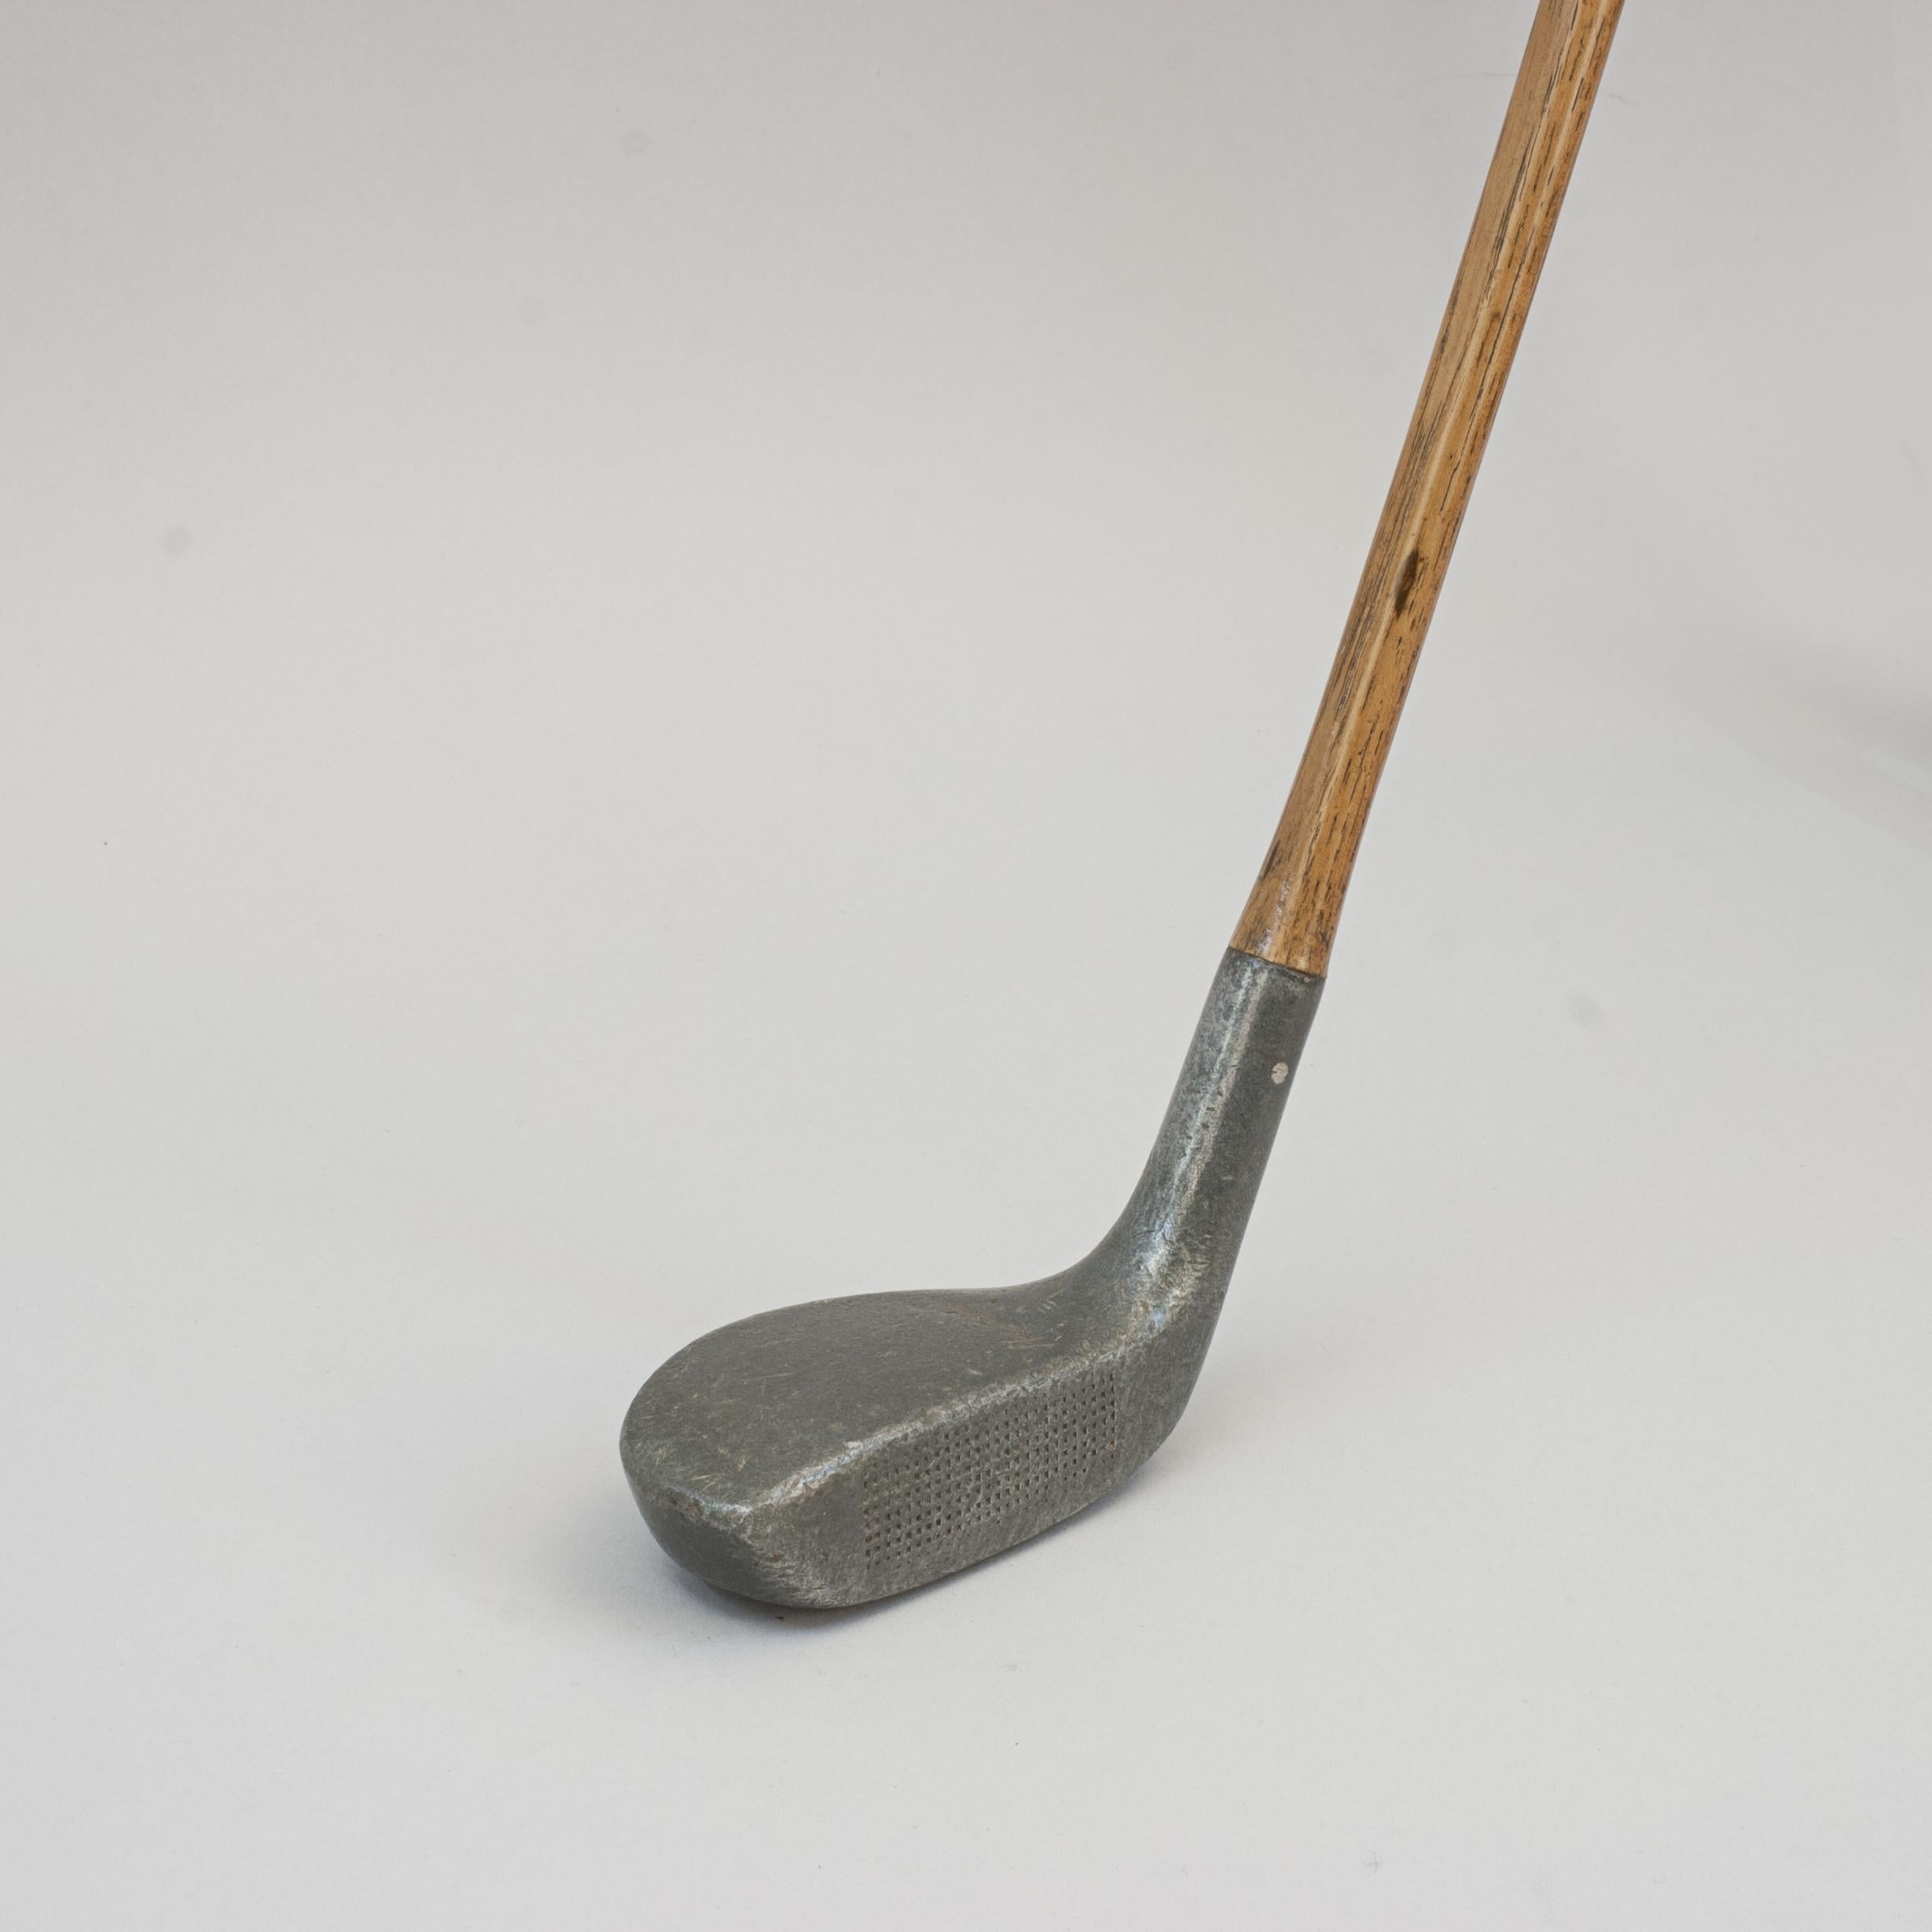 Huntly Aluminium Mallet Head Putter.
A good example of an aluminium head putter fitted with an original hickory shaft with a 'Huntly Grip'. The wooden shaft is round from the hosel terminating into a thicker rectangular handle. The back of the